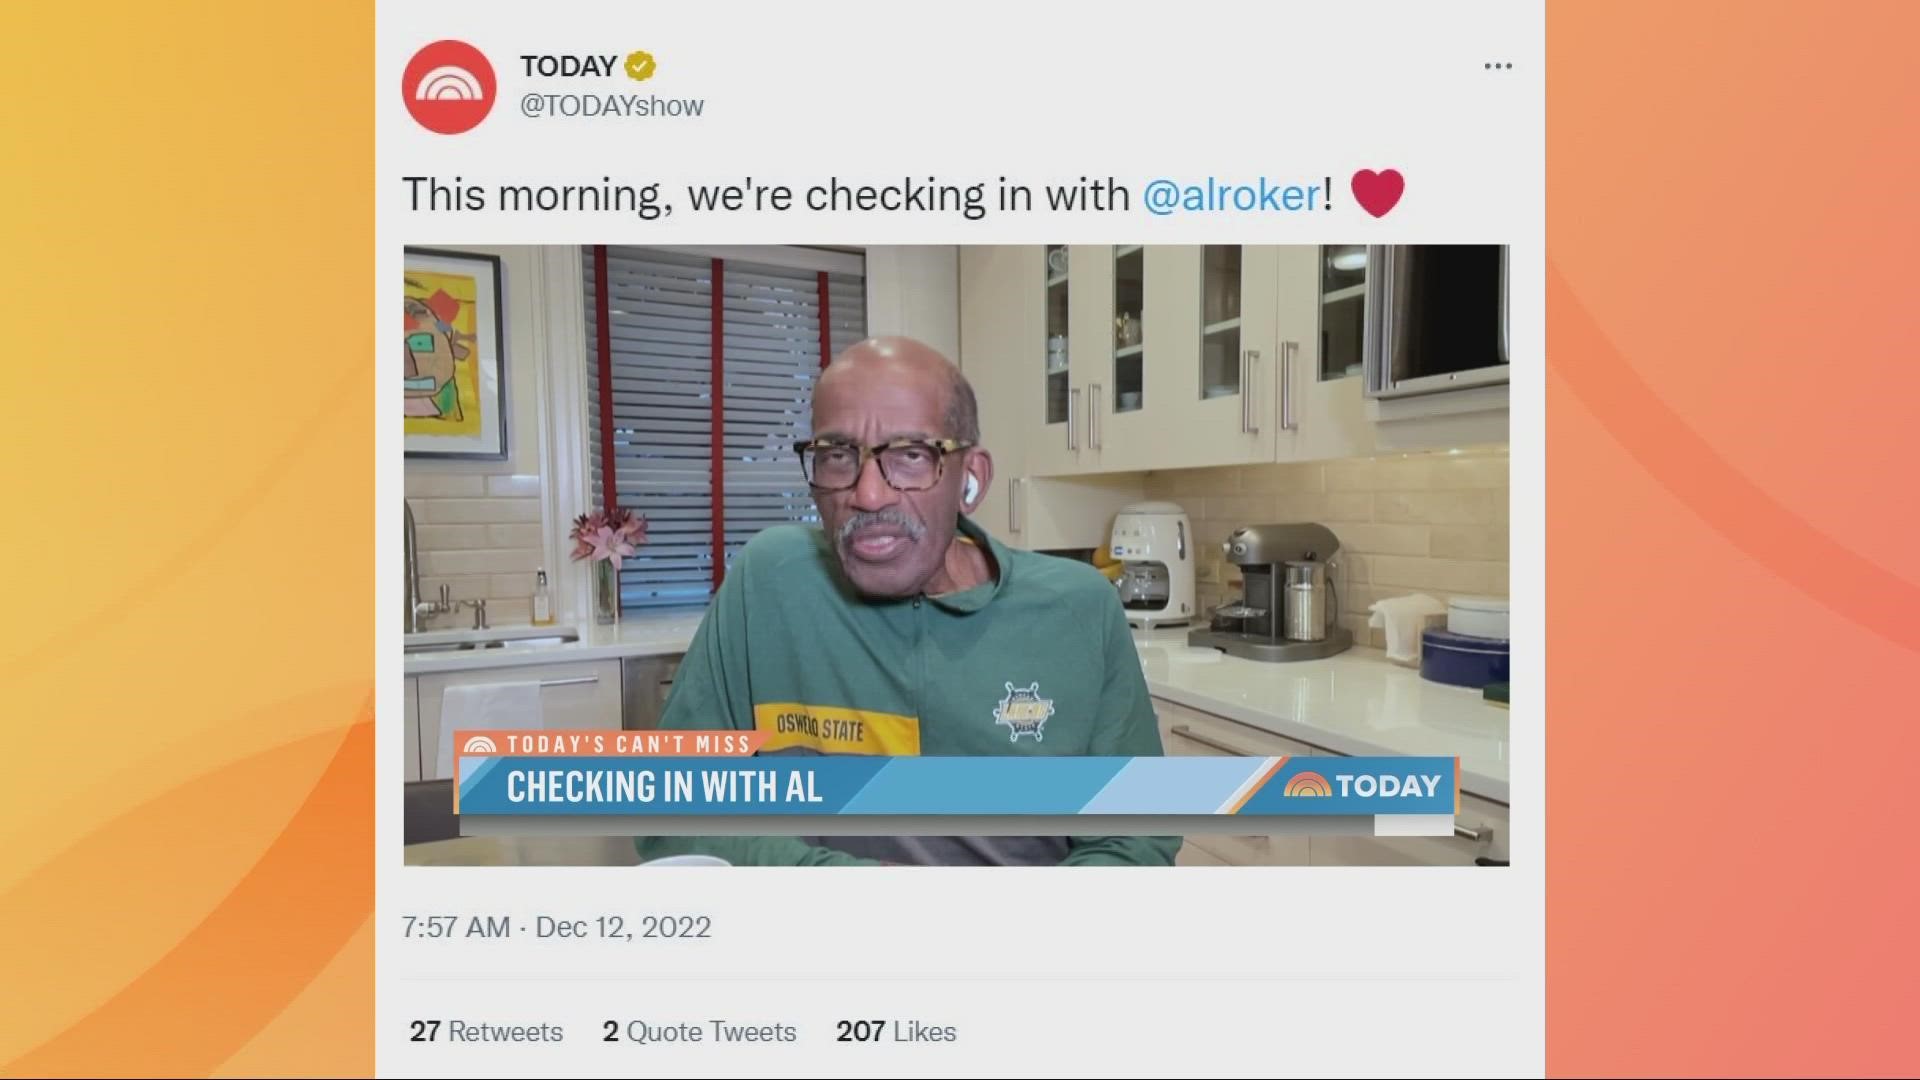 It was the first time Al Roker appeared on the "Today" show in more than a month while dealing with health issues.